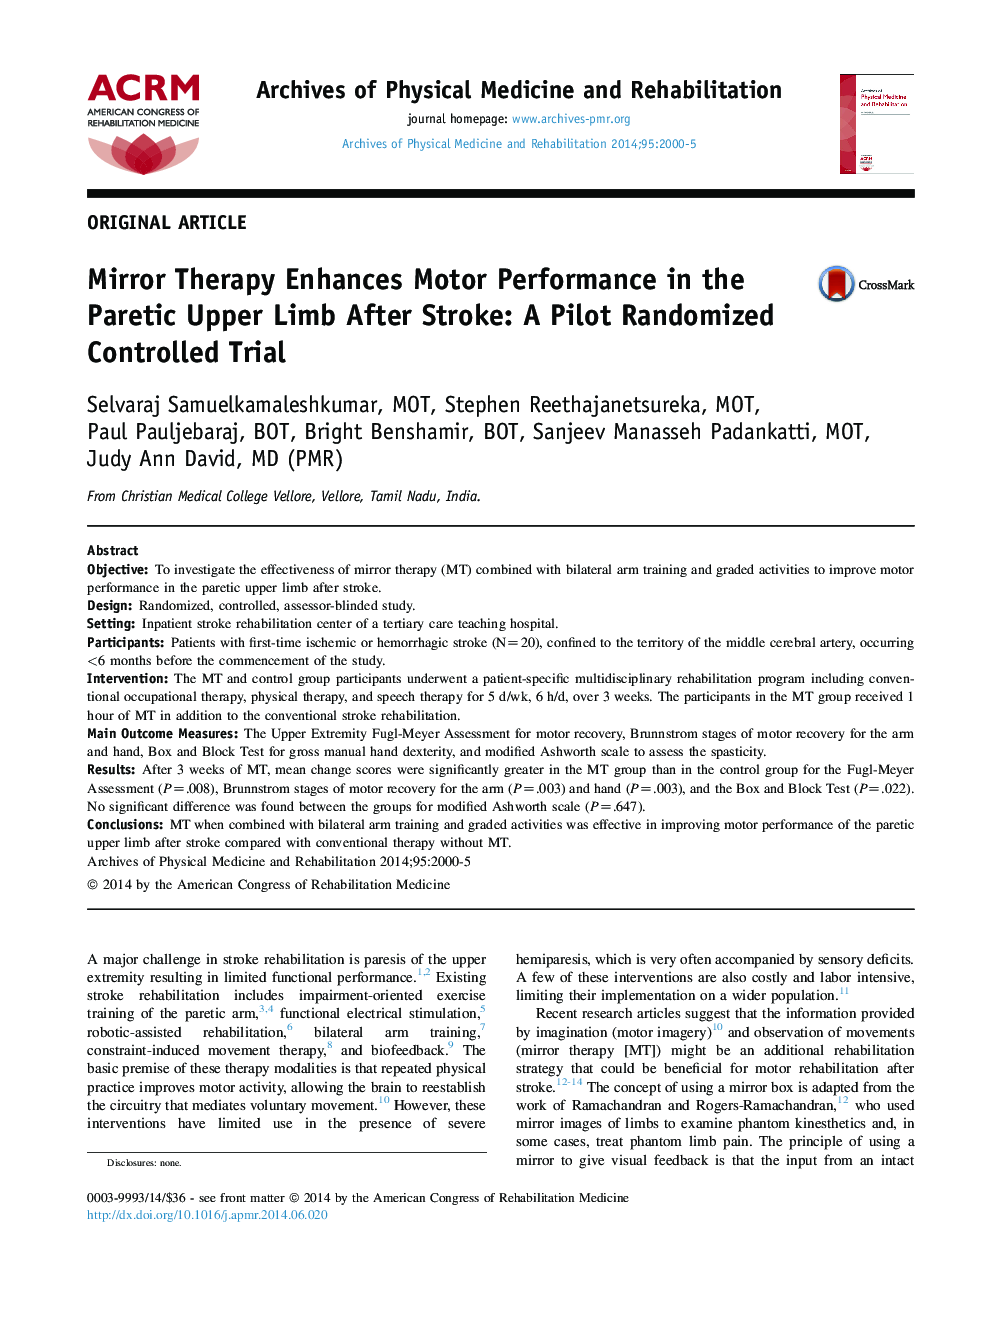 Mirror Therapy Enhances Motor Performance in the Paretic Upper Limb After Stroke: A Pilot Randomized Controlled Trial 